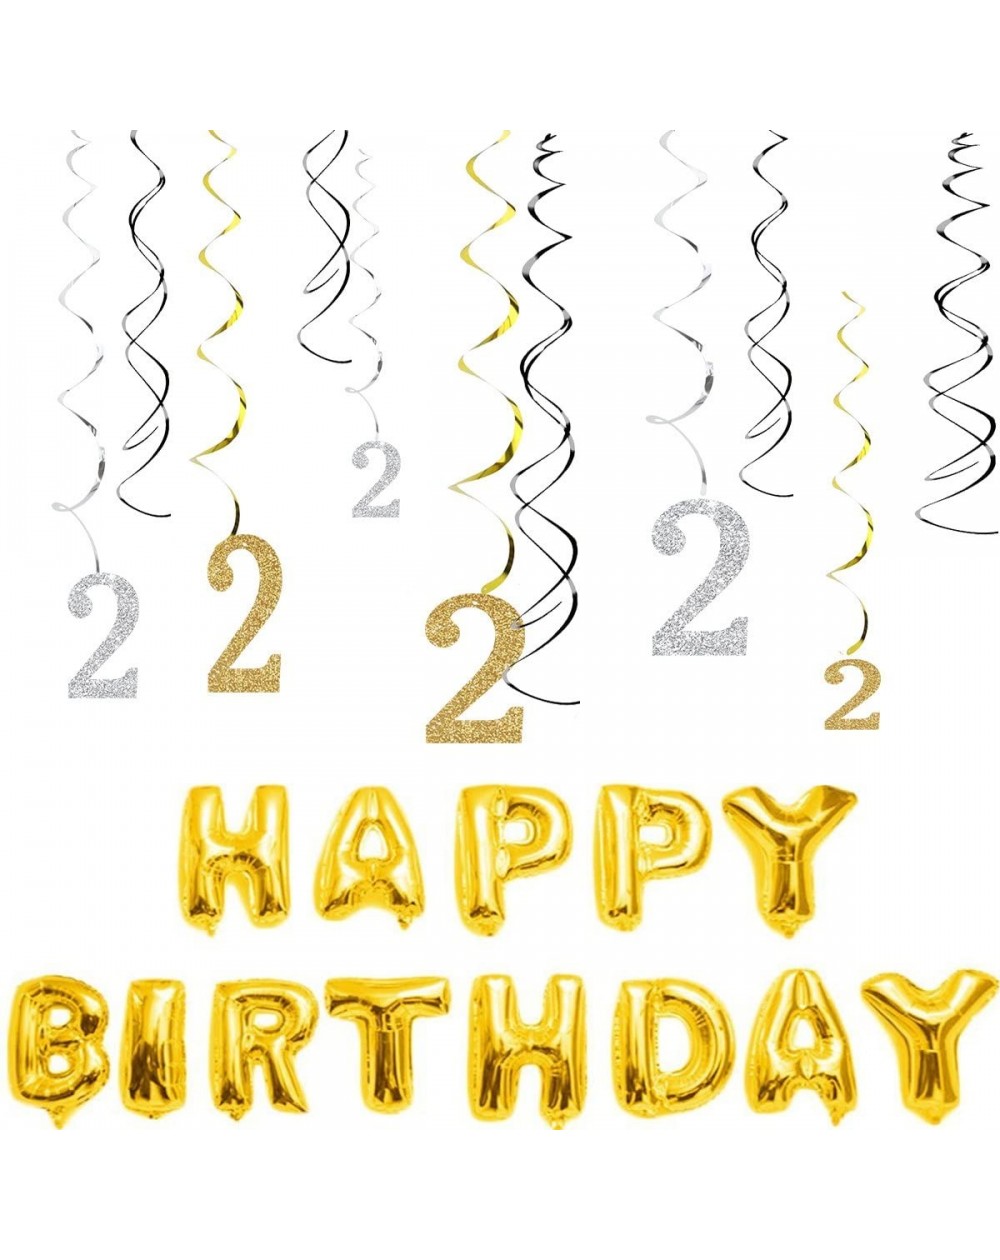 Banners & Garlands 2nd Birthday Decorations Kit- Gold Silver Glitter Happy second Birthday Banner & Sparkling Celebration Han...